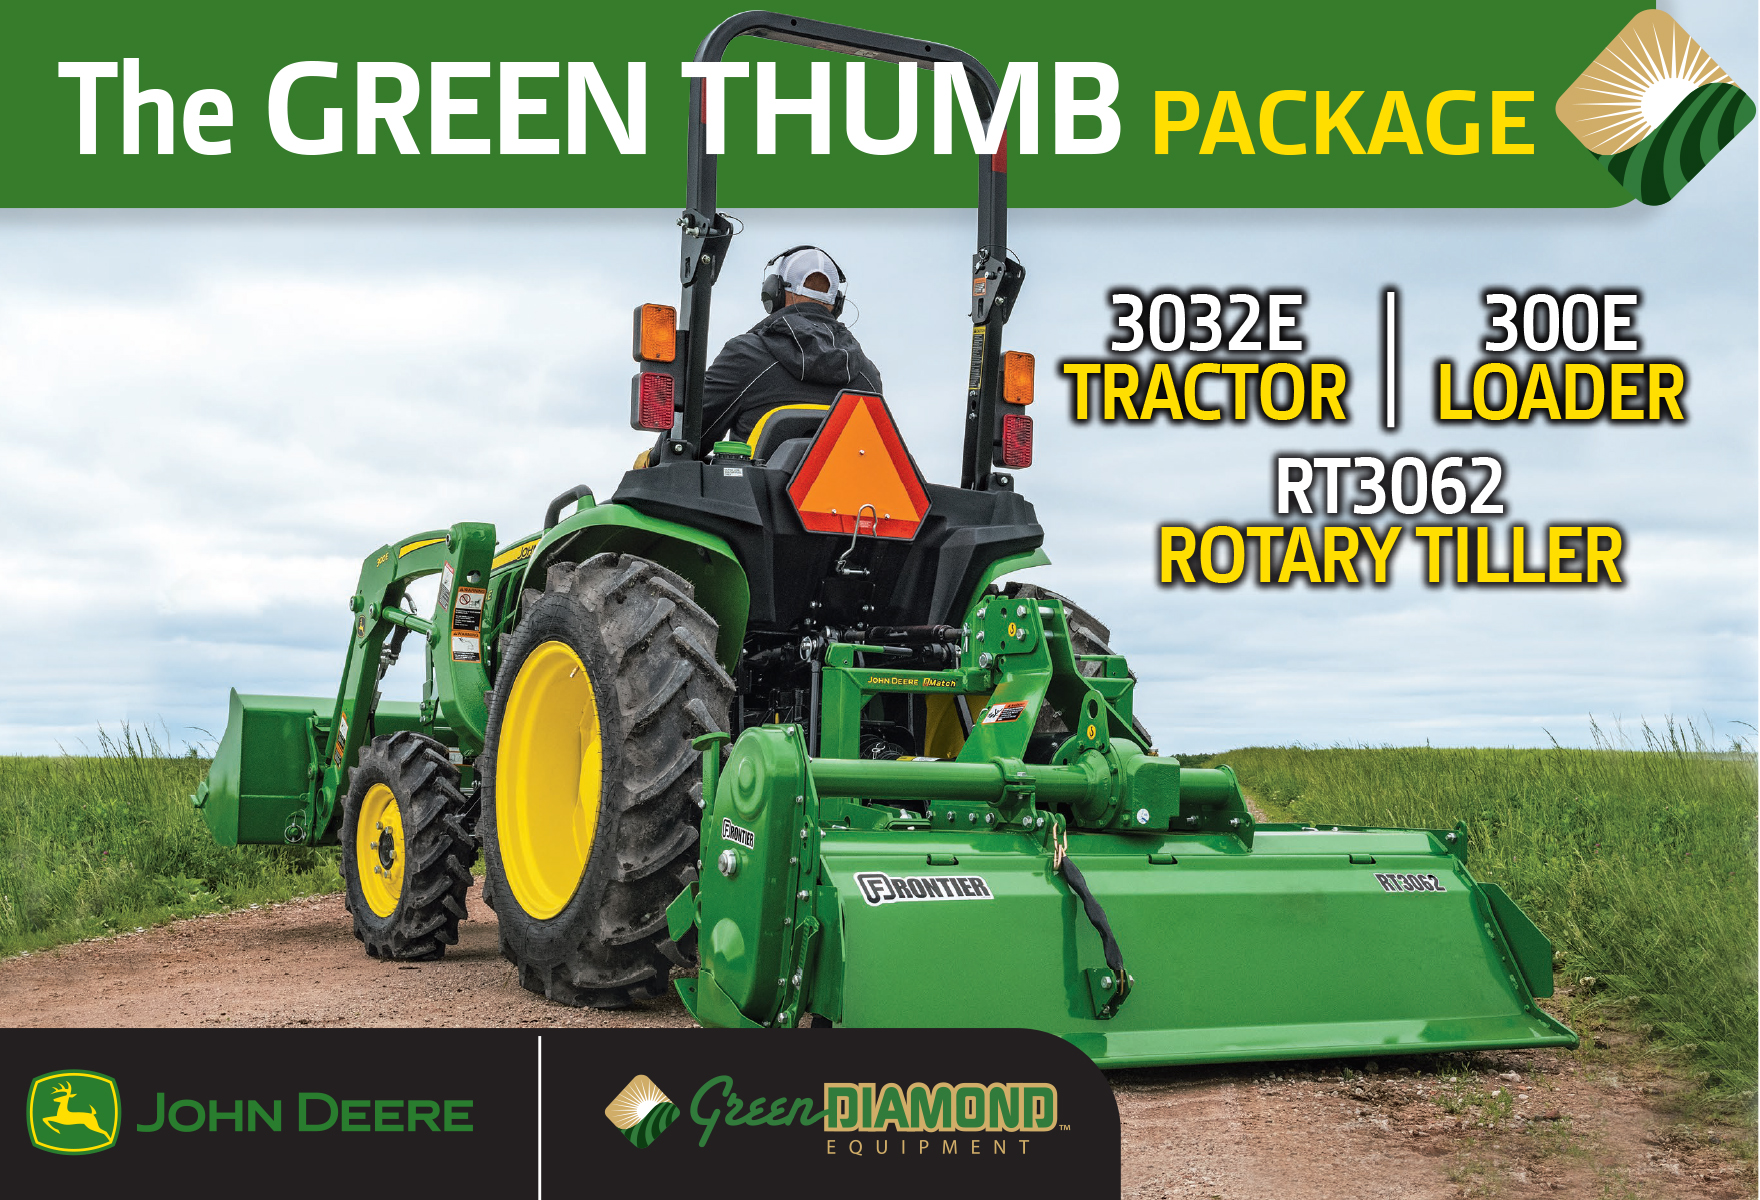 The Green Thumb Package